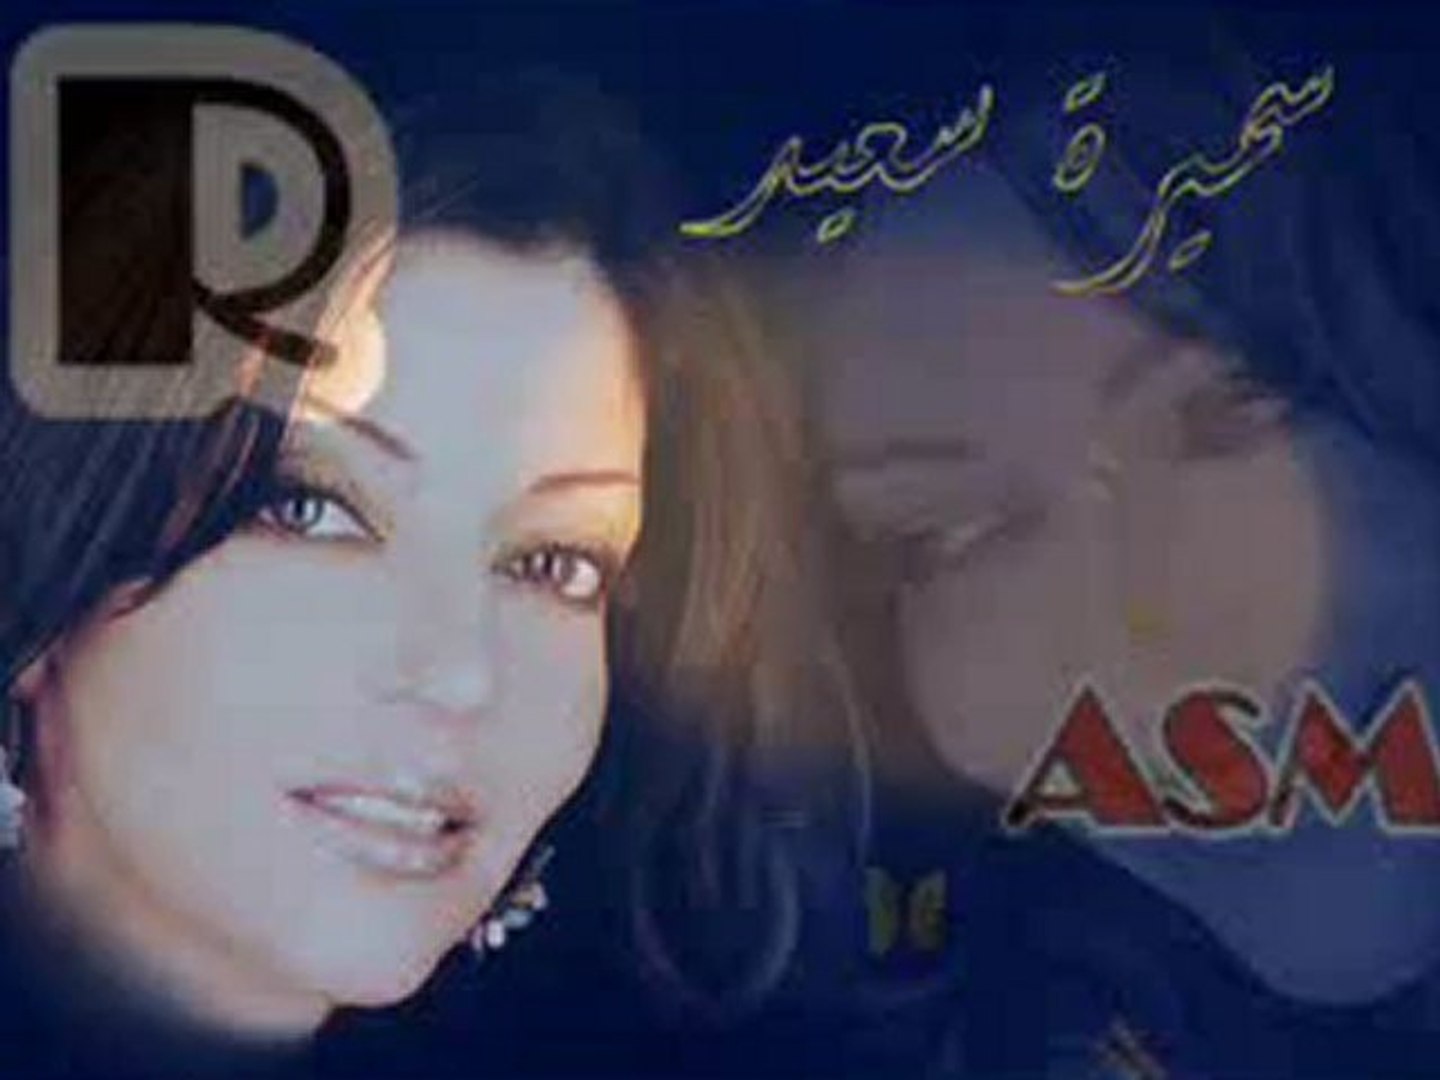 R A S M A L A T - سميرة سعيد - بشتاقلك ساعات - video Dailymotion